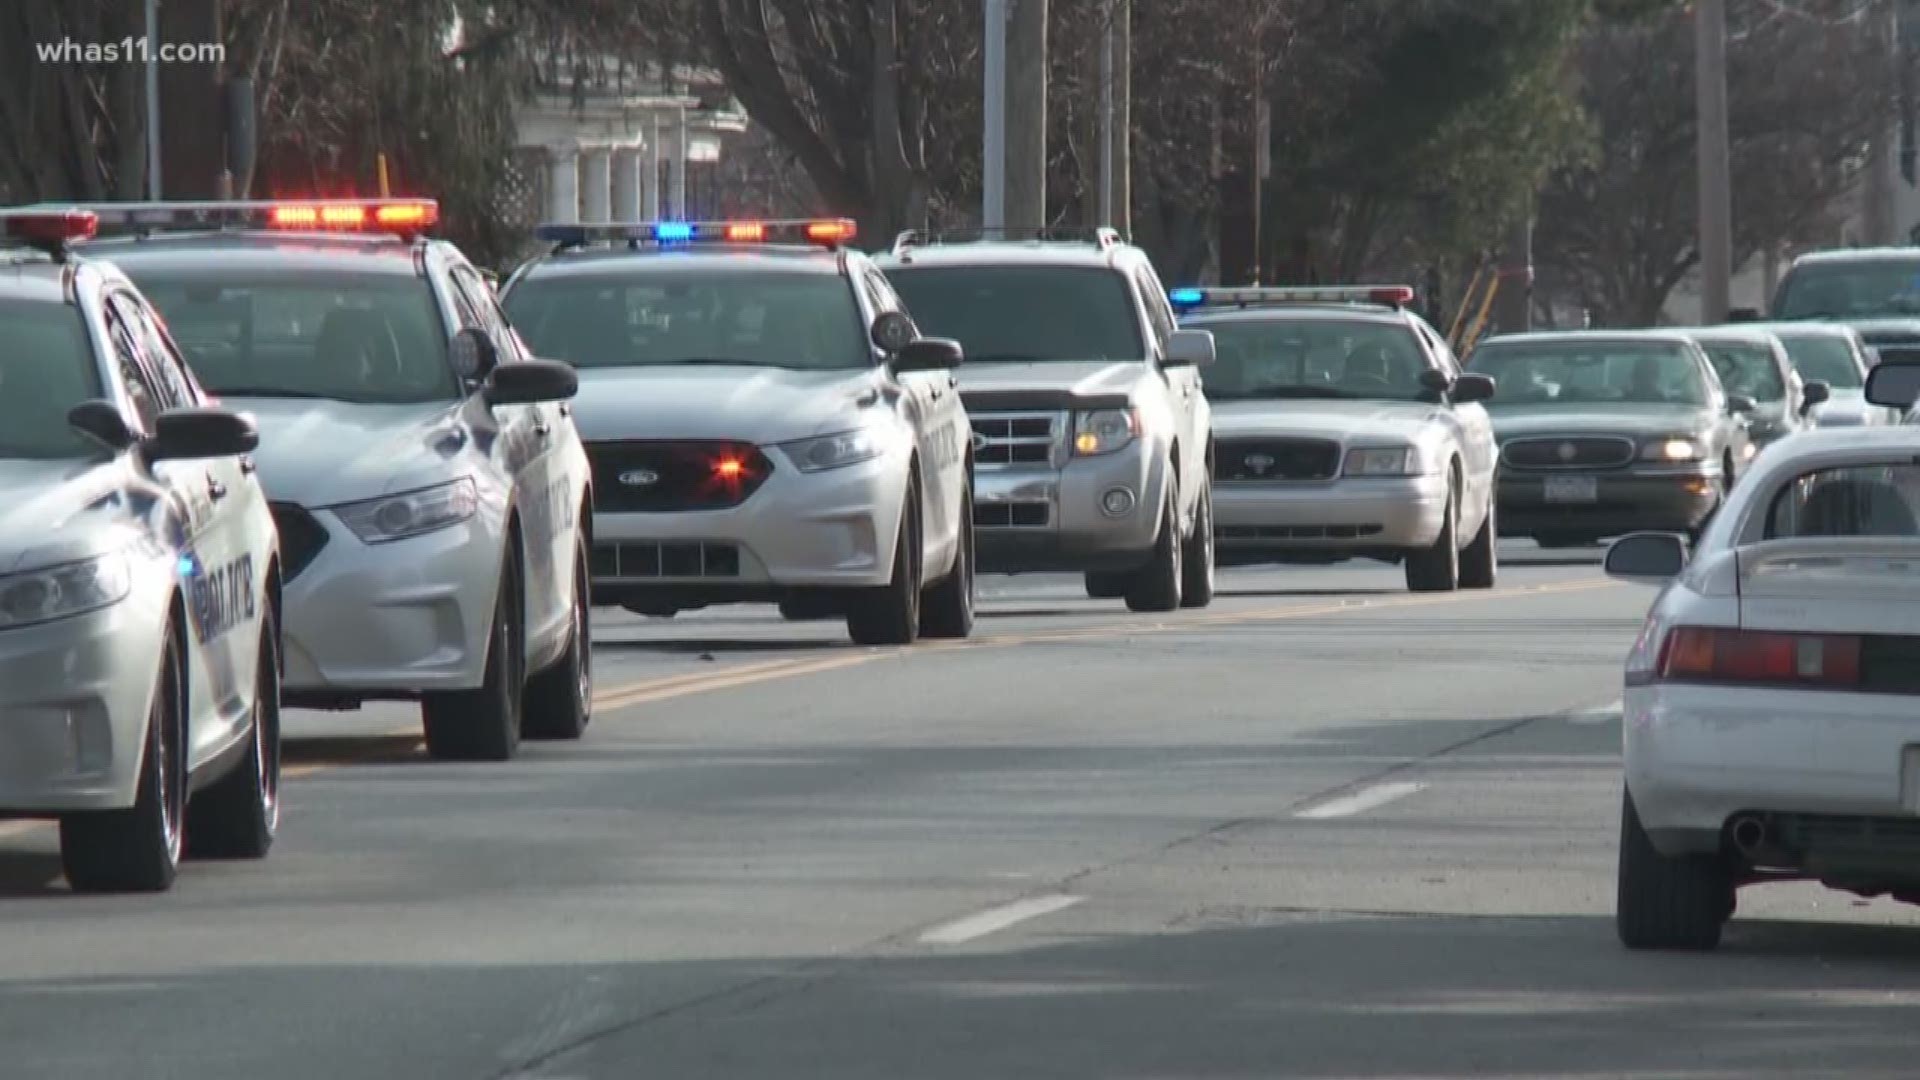 LMPD officers escorted Detective Mengedoht's casket to the funeral home.